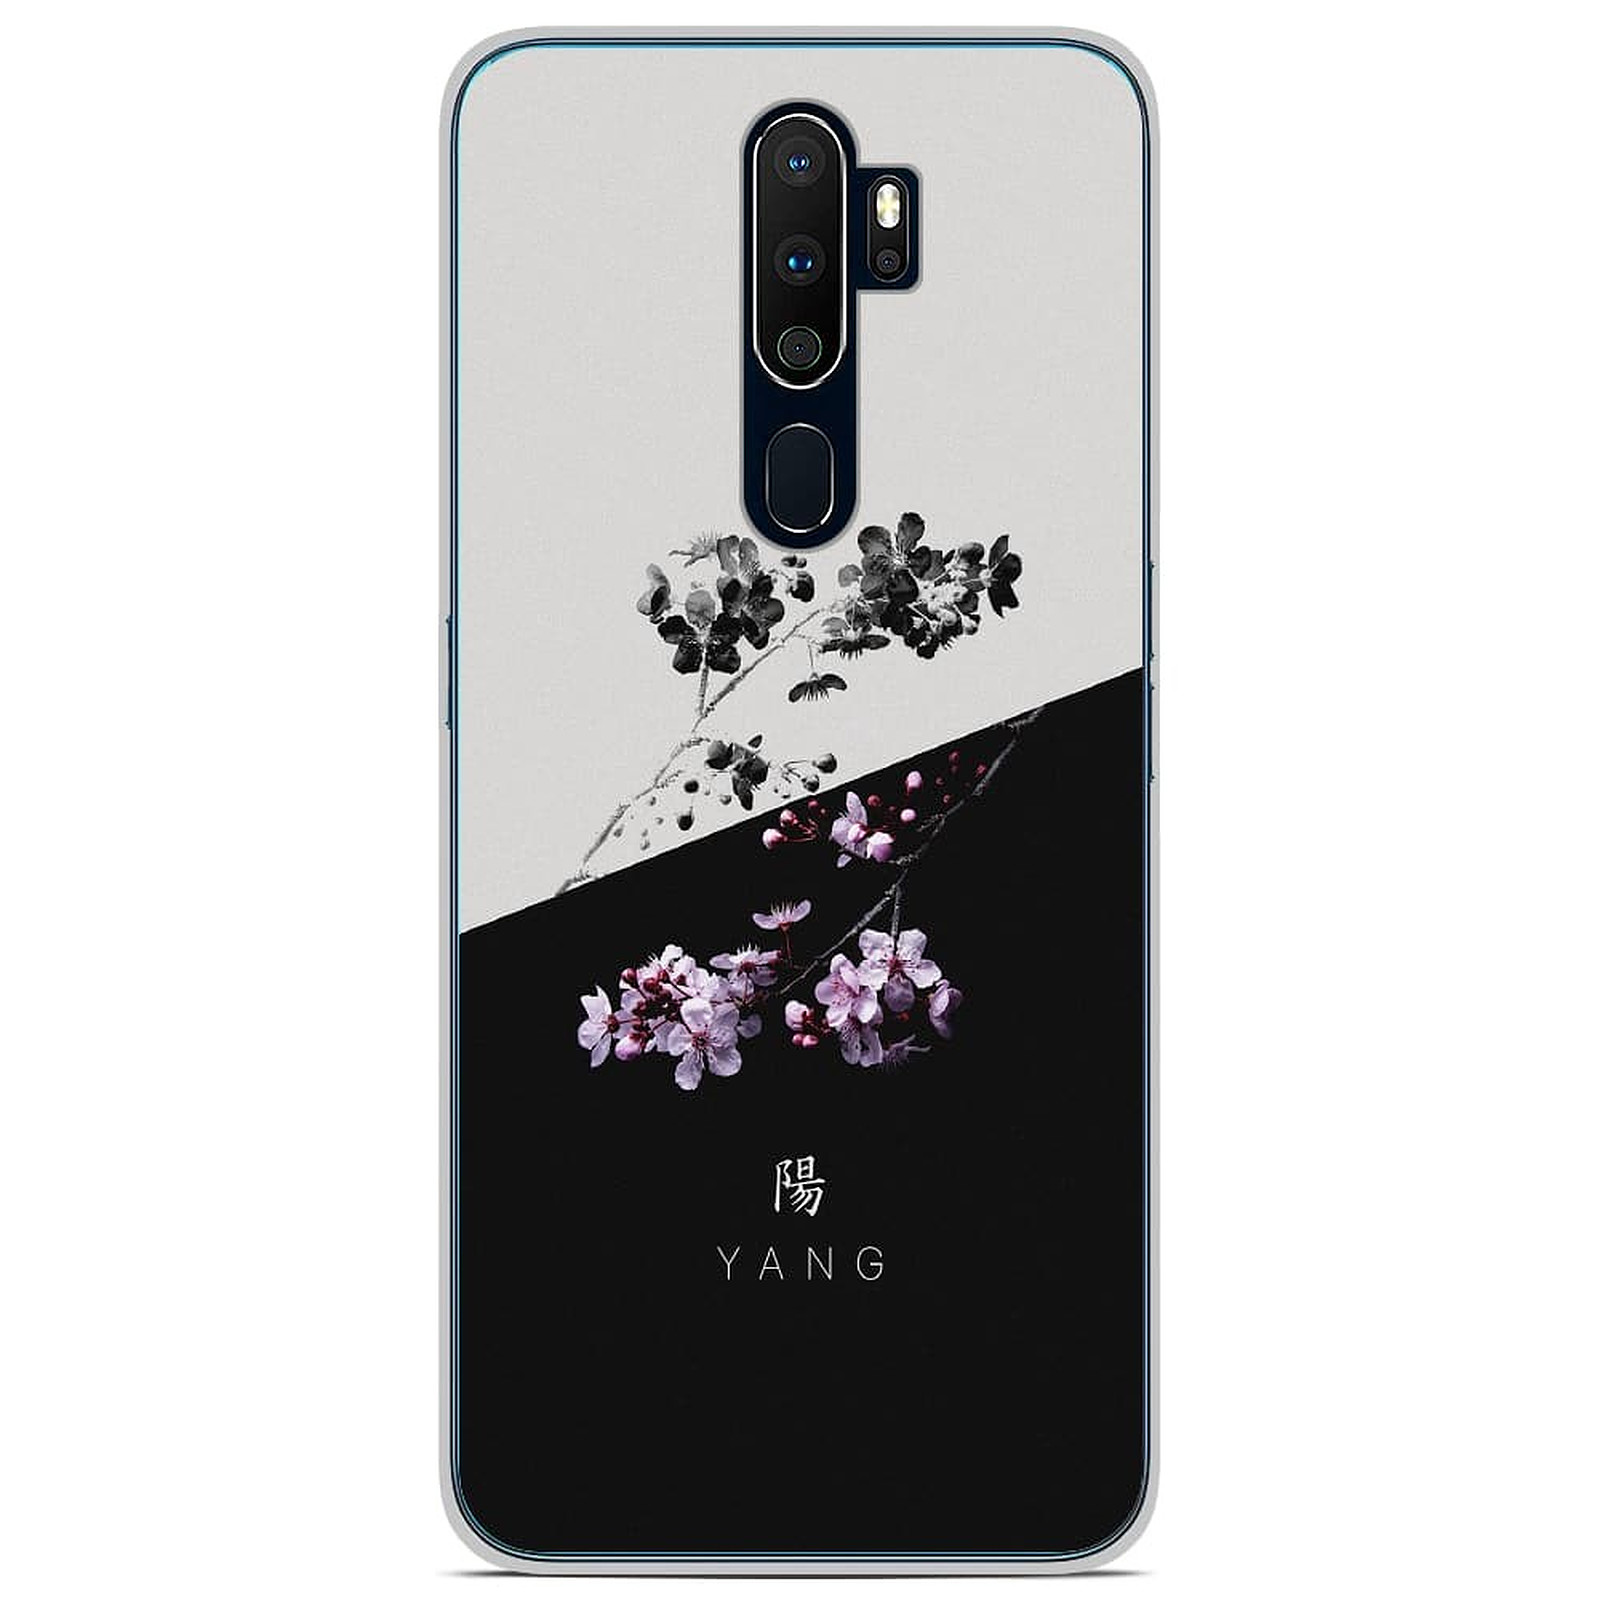 1001 Coques Coque silicone gel Oppo A9 2020 motif Yin et Yang - Coque telephone 1001Coques